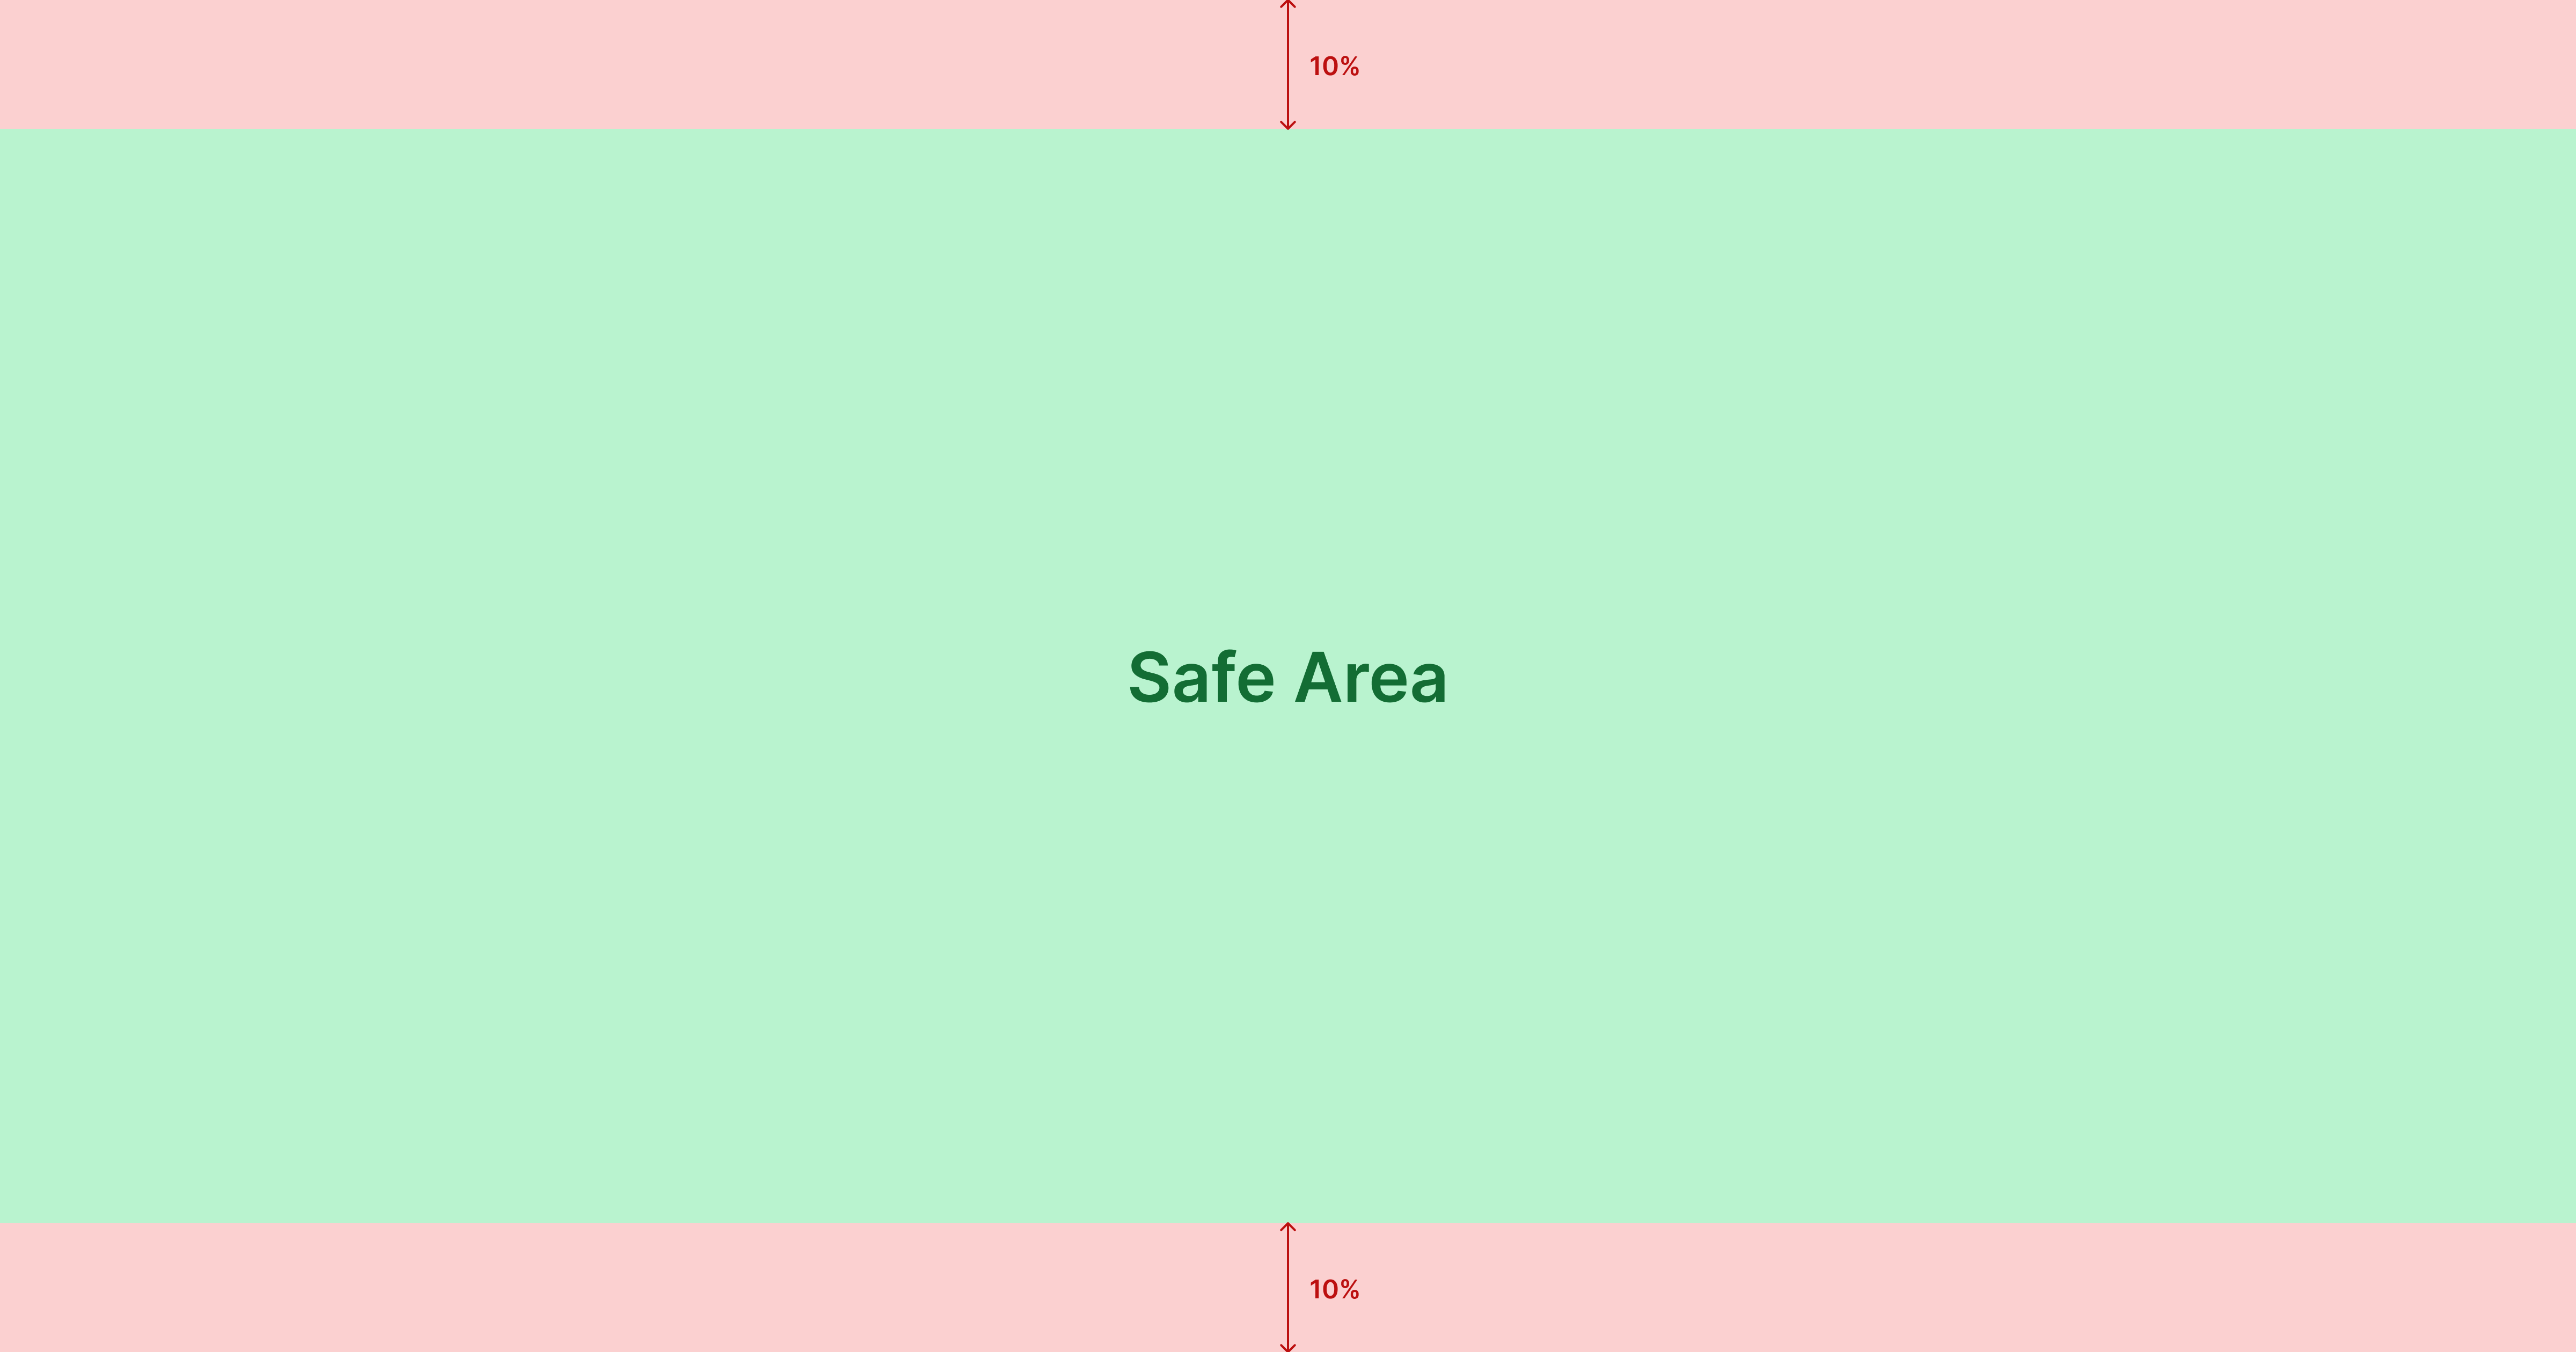 Keep the most important parts of your image (e.g. text, key elements) within the SAFE AREA.